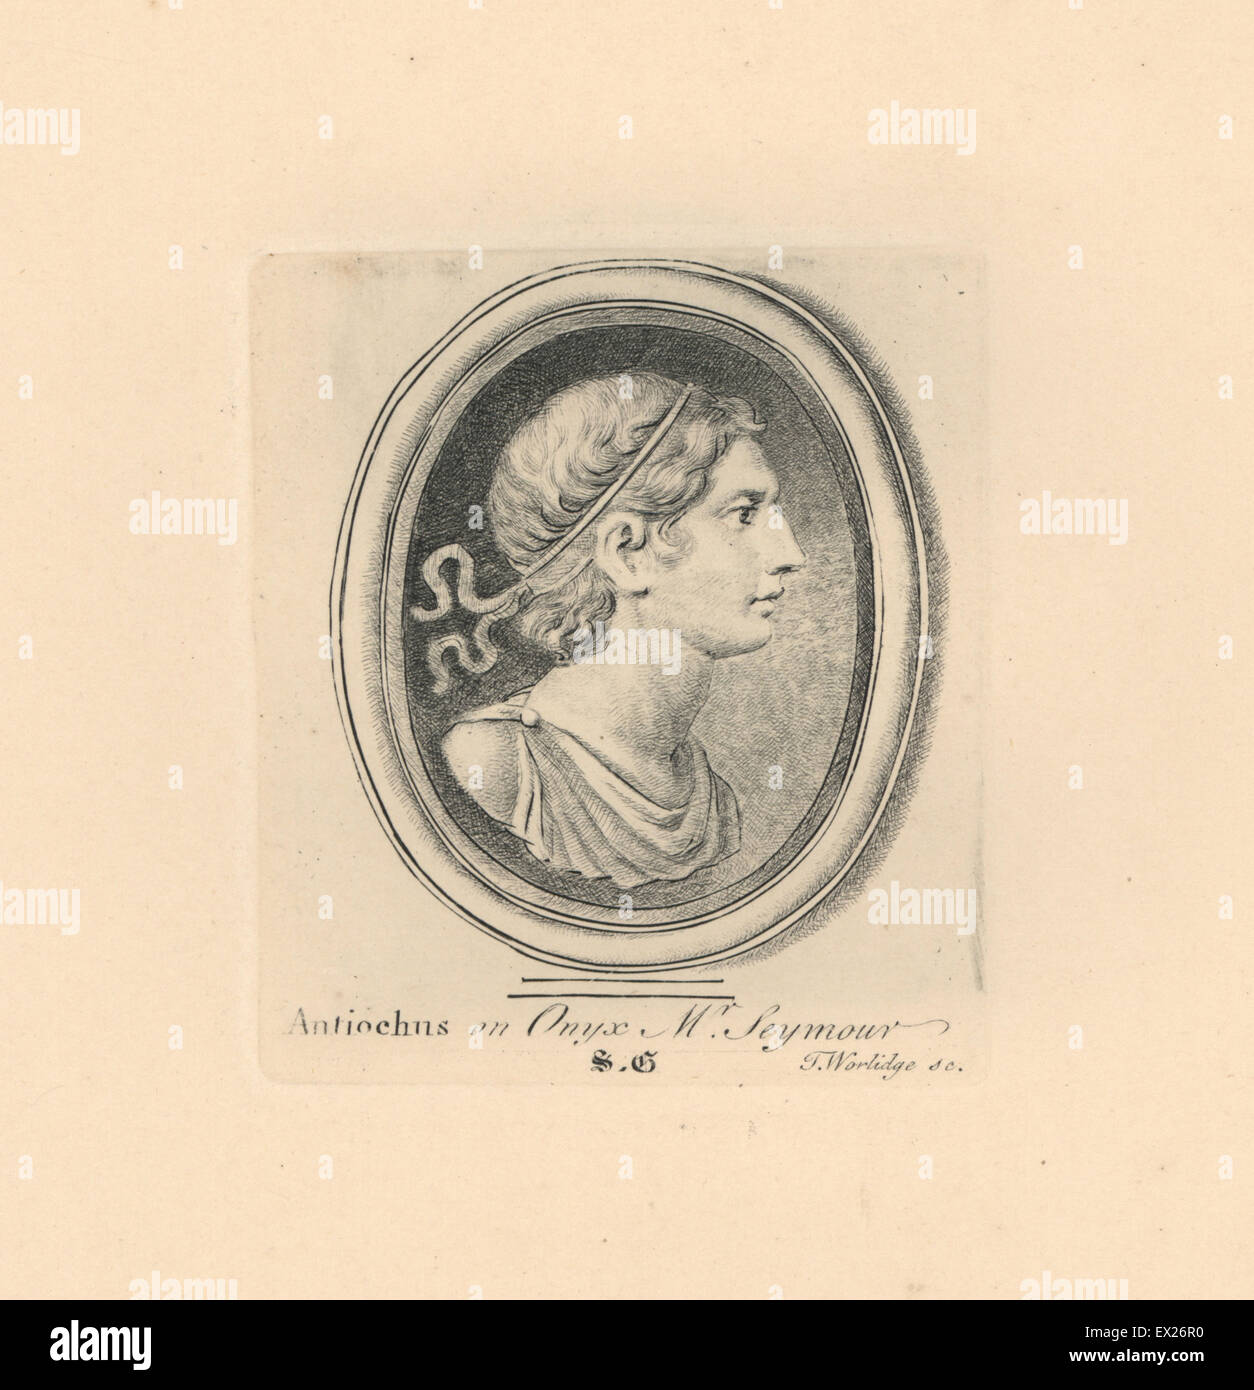 Portrait of Antiochus III the Great, 6th ruler of the Seleucid Empire, in diadem, on onyx in Mr Seymour's collection. Copperplate engraving by Thomas Worlidge from James Vallentin's One Hundred and Eight Engravings from Antique Gems, 1863. Stock Photo